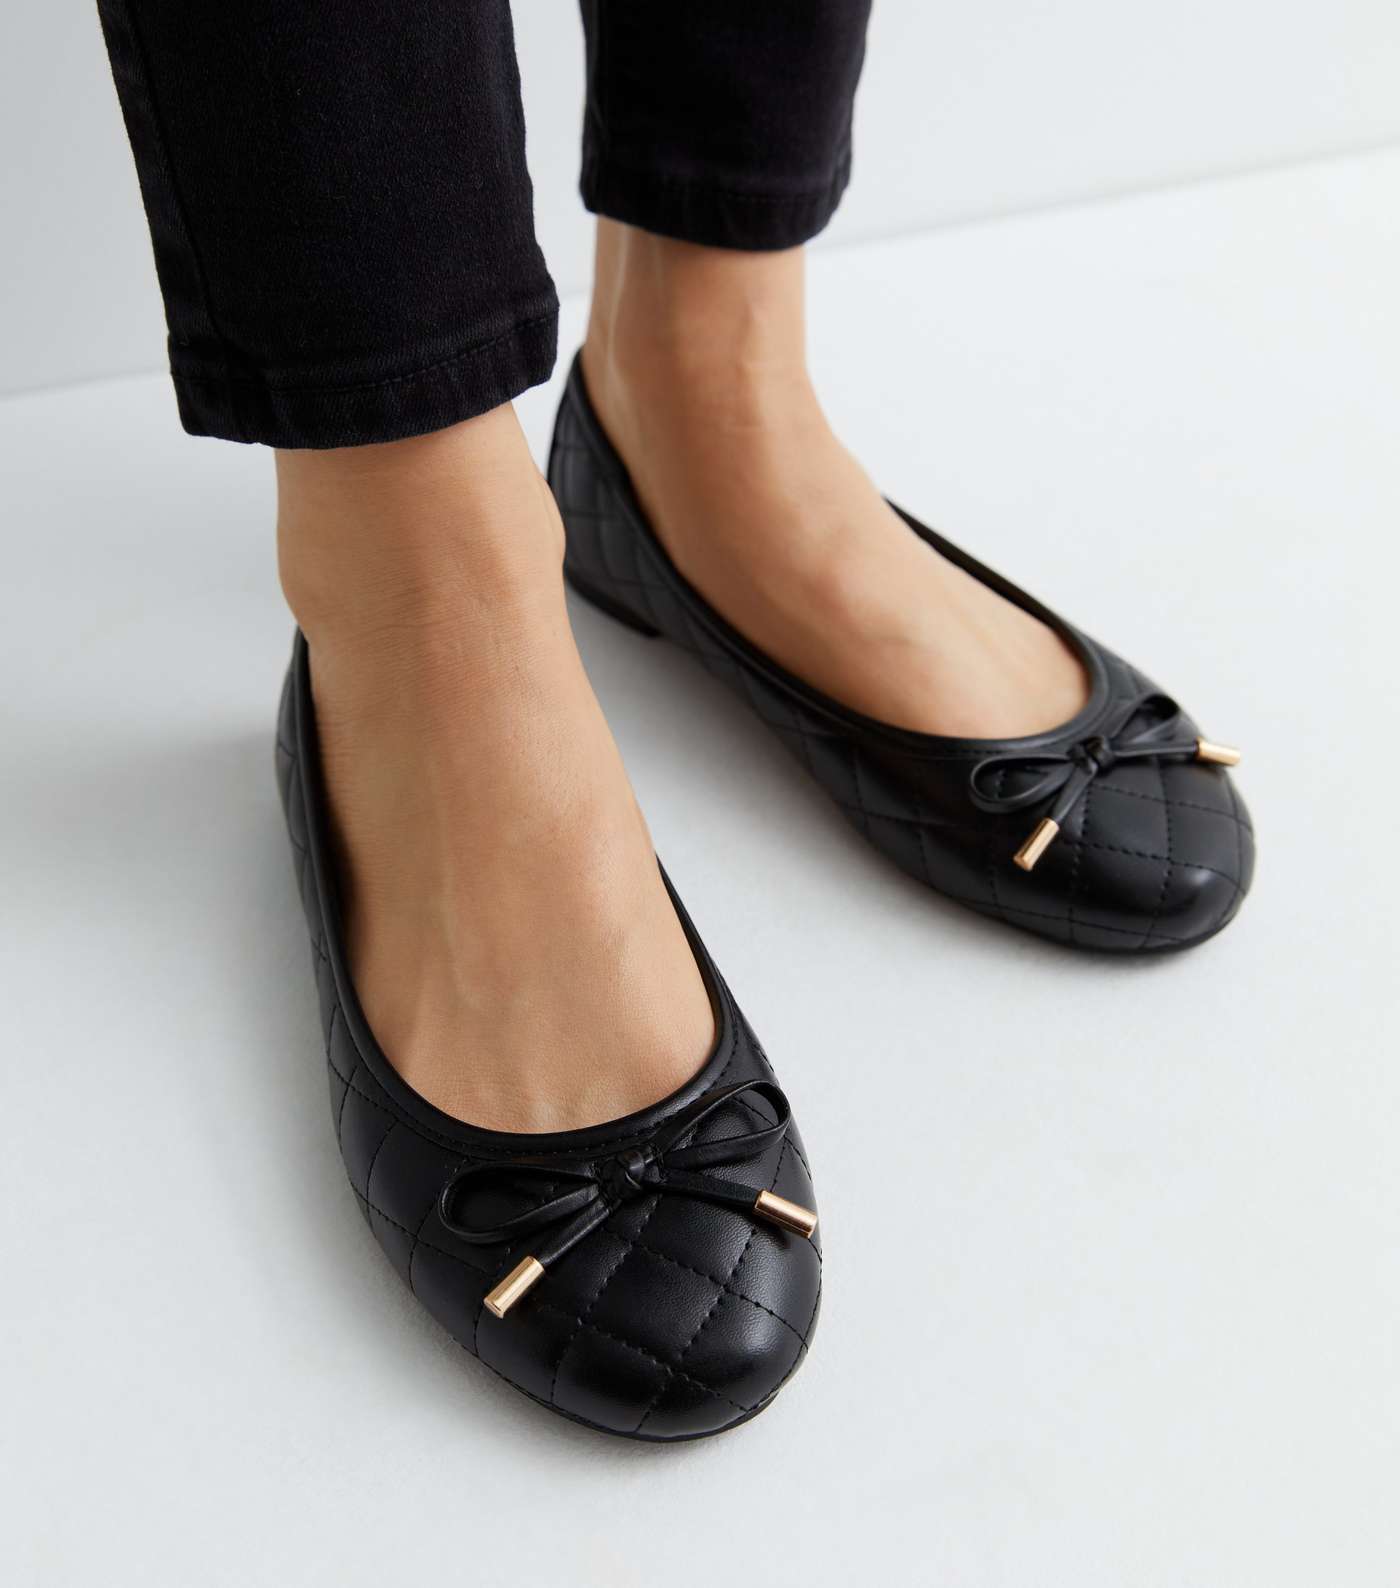 Wide Fit Black Quilted Leather-Look Bow Ballerina Pumps Image 2